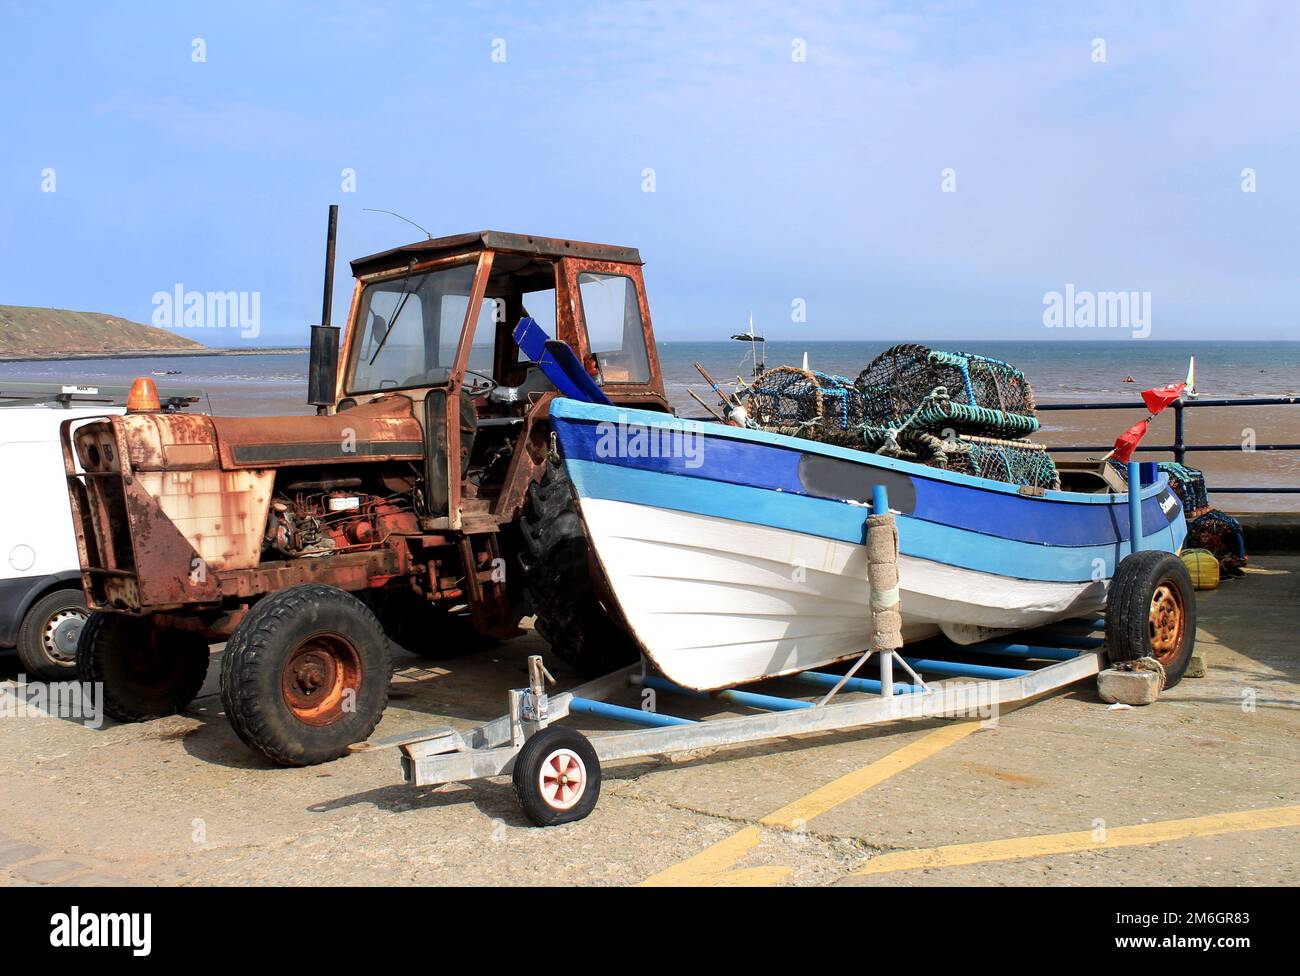 Cobble landing in Filey, boat with old tractor, North Yorkshire, England. Stock Photo